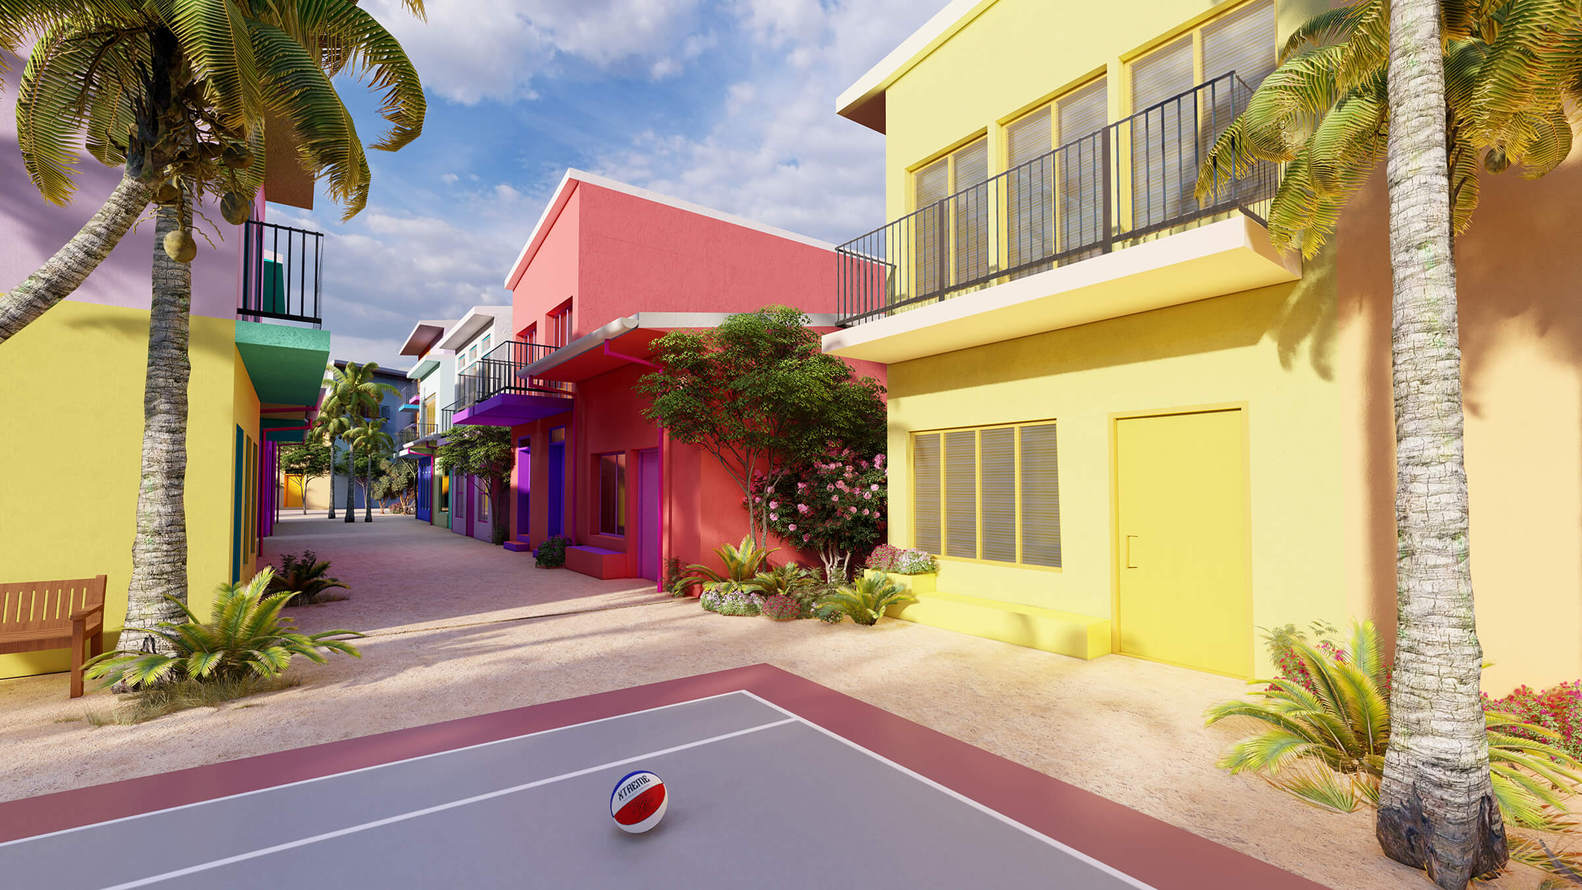 (2-story house with bright colors. Photo by Waterstudio/Dutch docklands Maldives) 